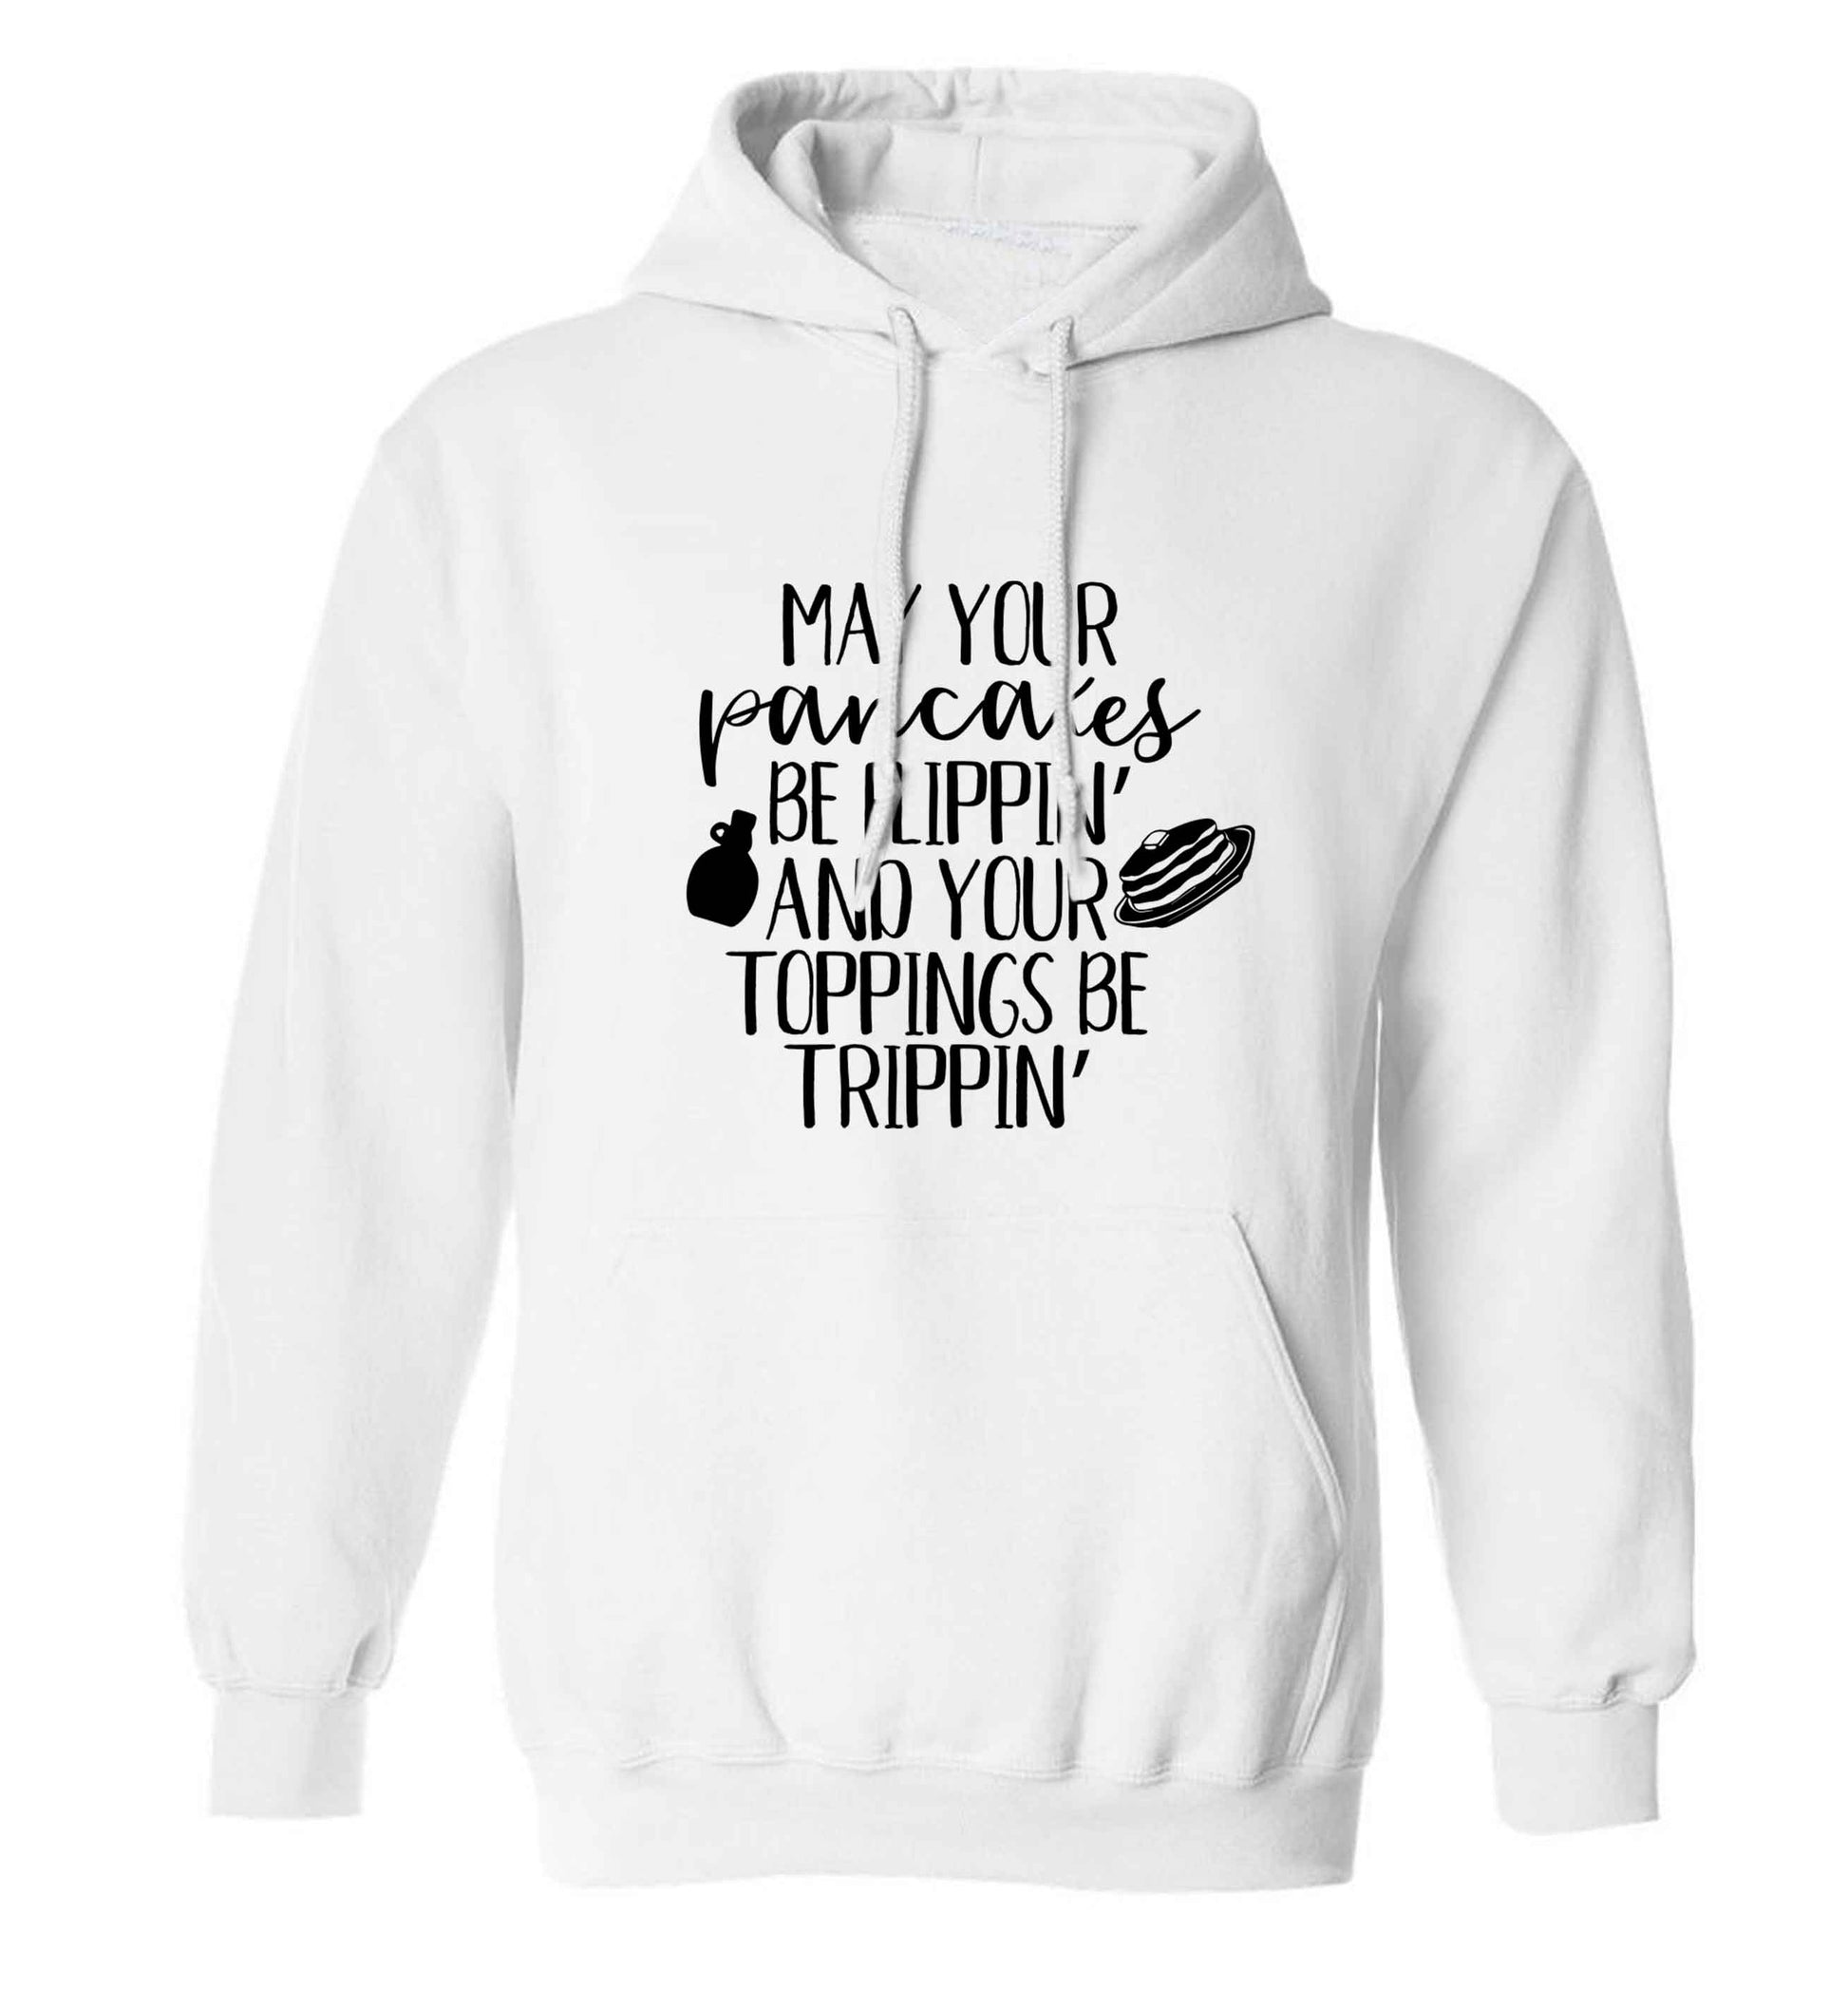 May your pancakes be flippin' and your toppings be trippin' adults unisex white hoodie 2XL